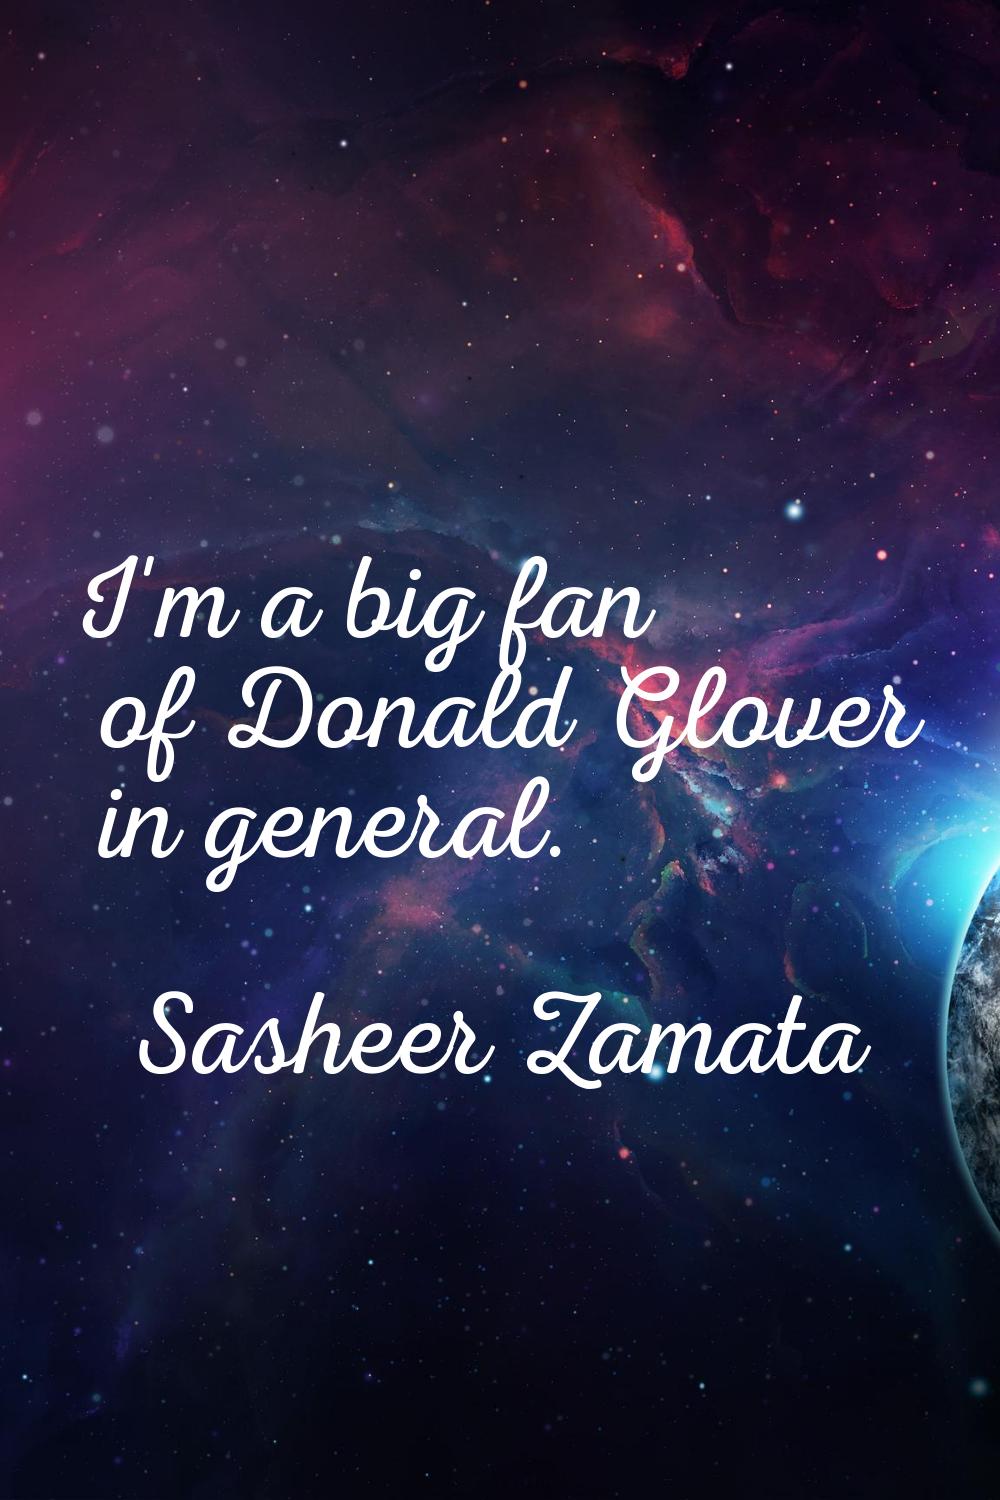 I'm a big fan of Donald Glover in general.